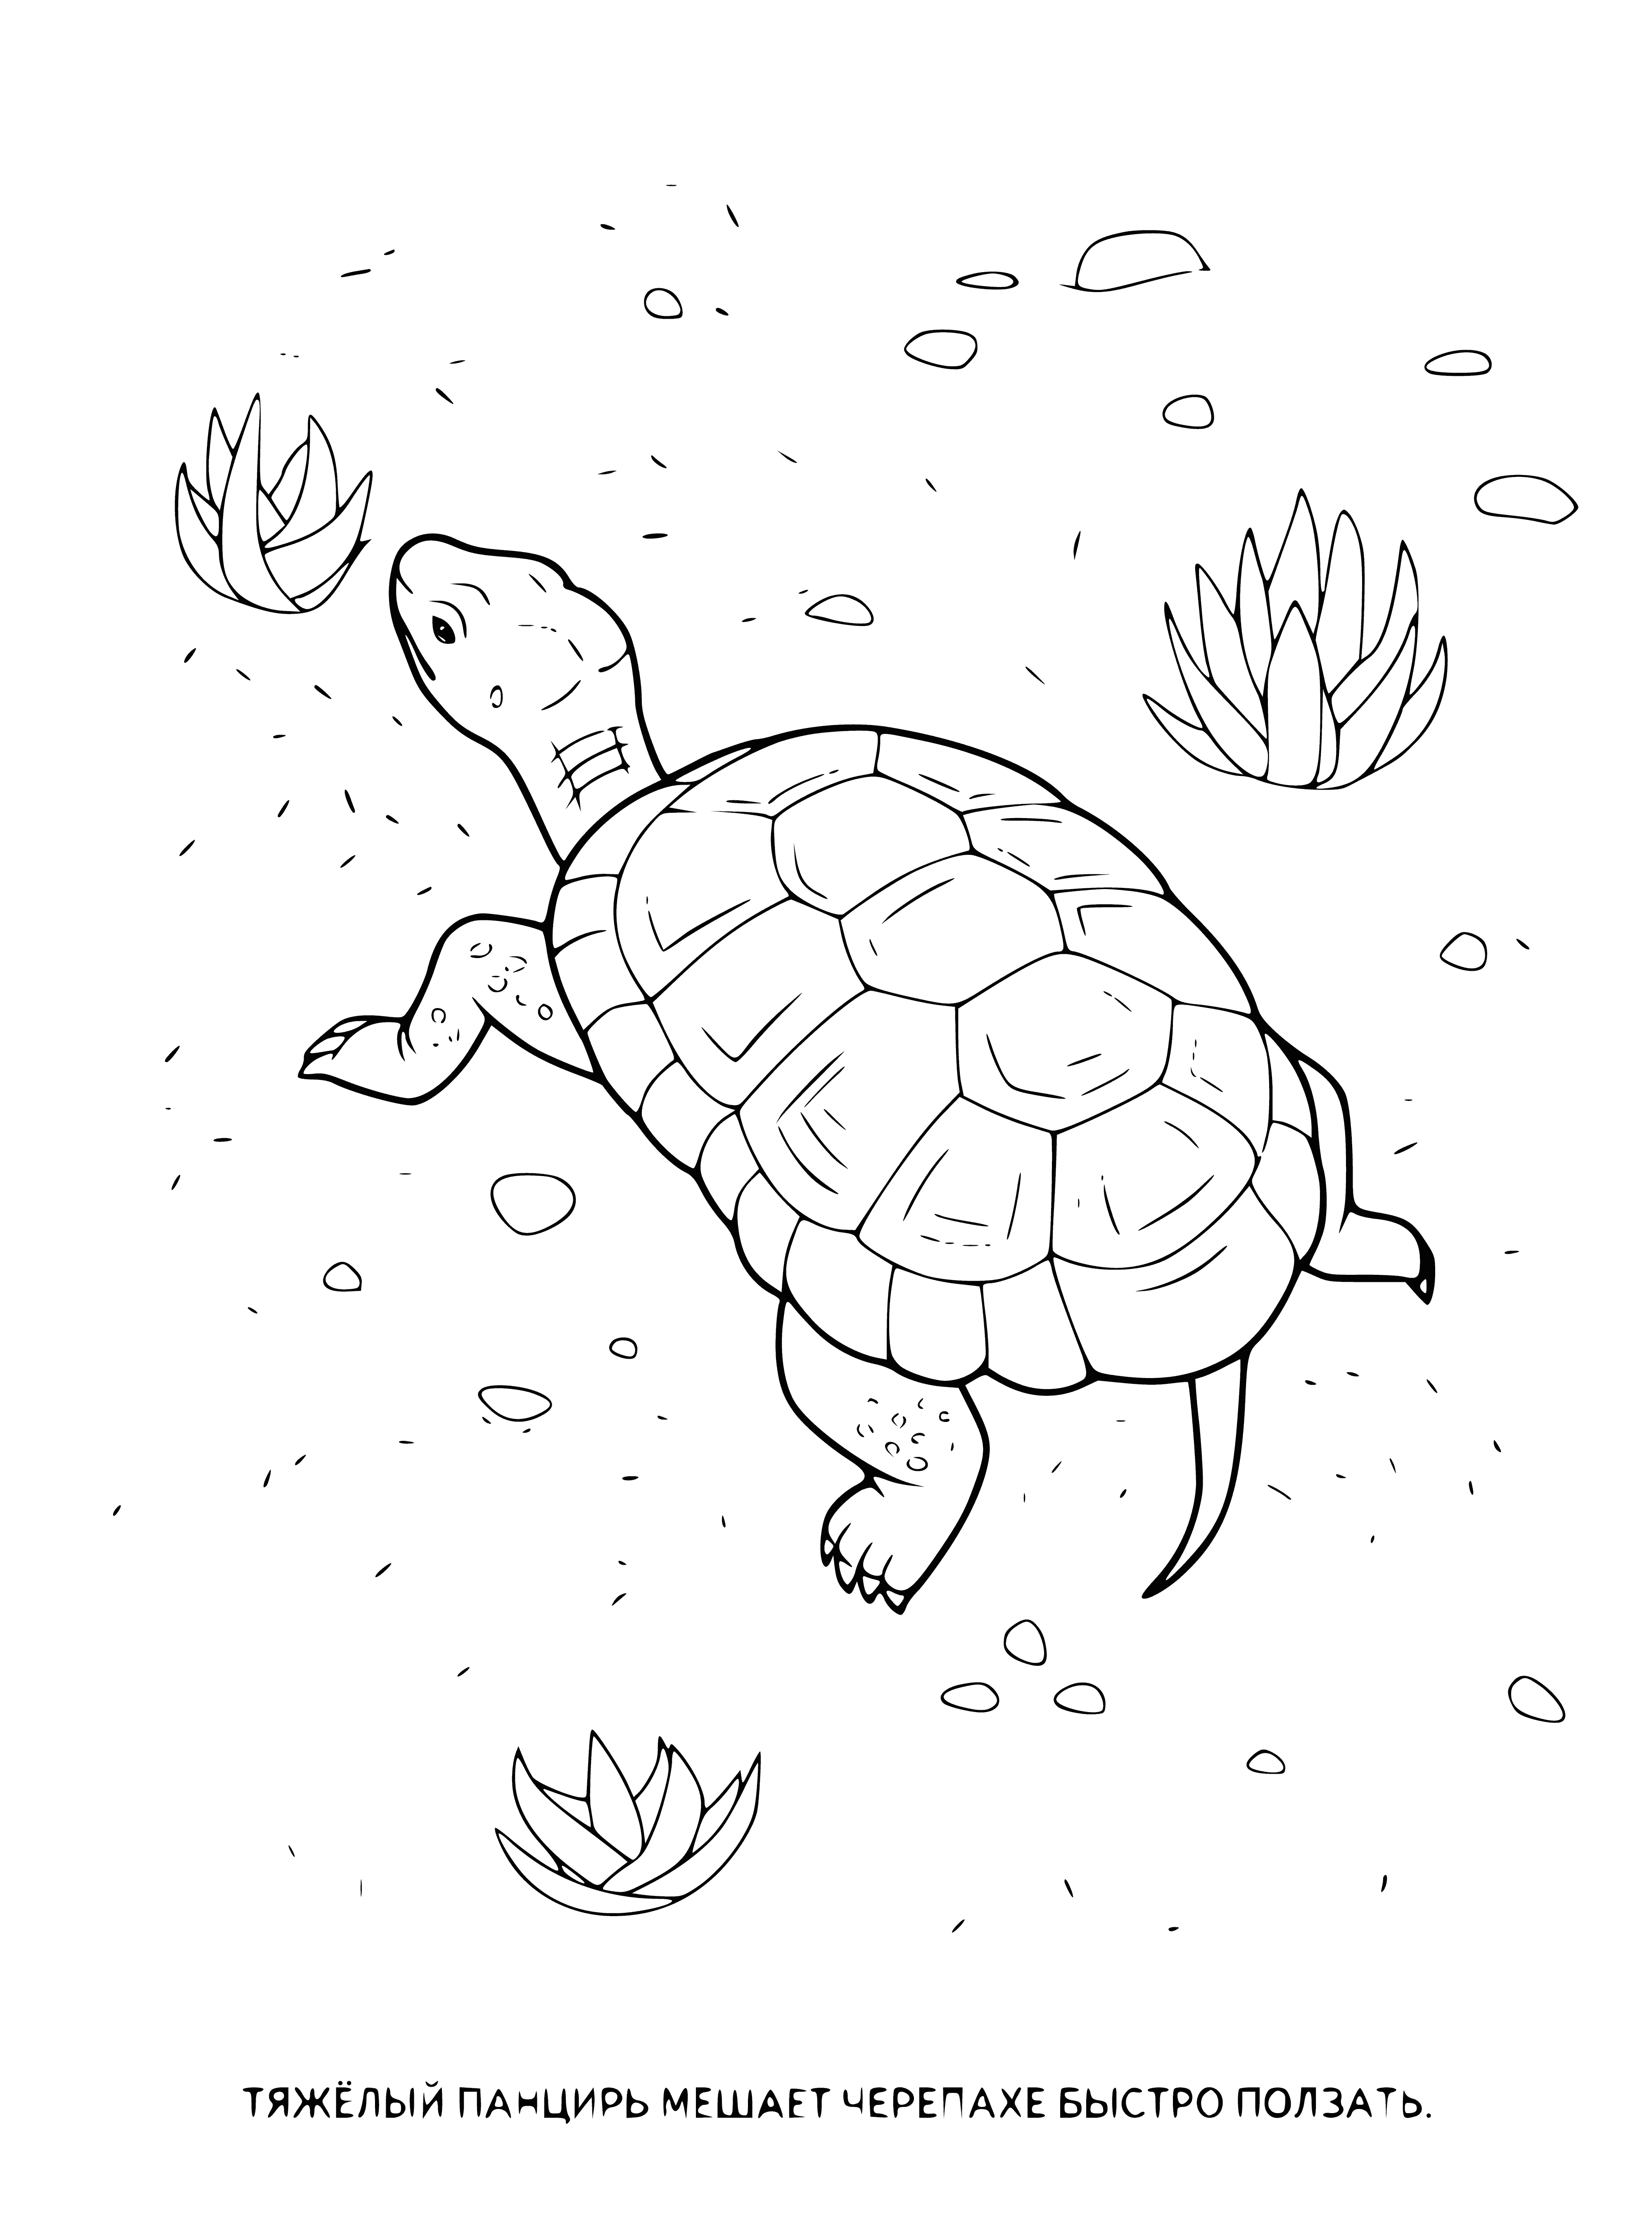 coloring page: Green turtle w/ long neck & brown shell swimming towards land w/ black eyes & open mouth.